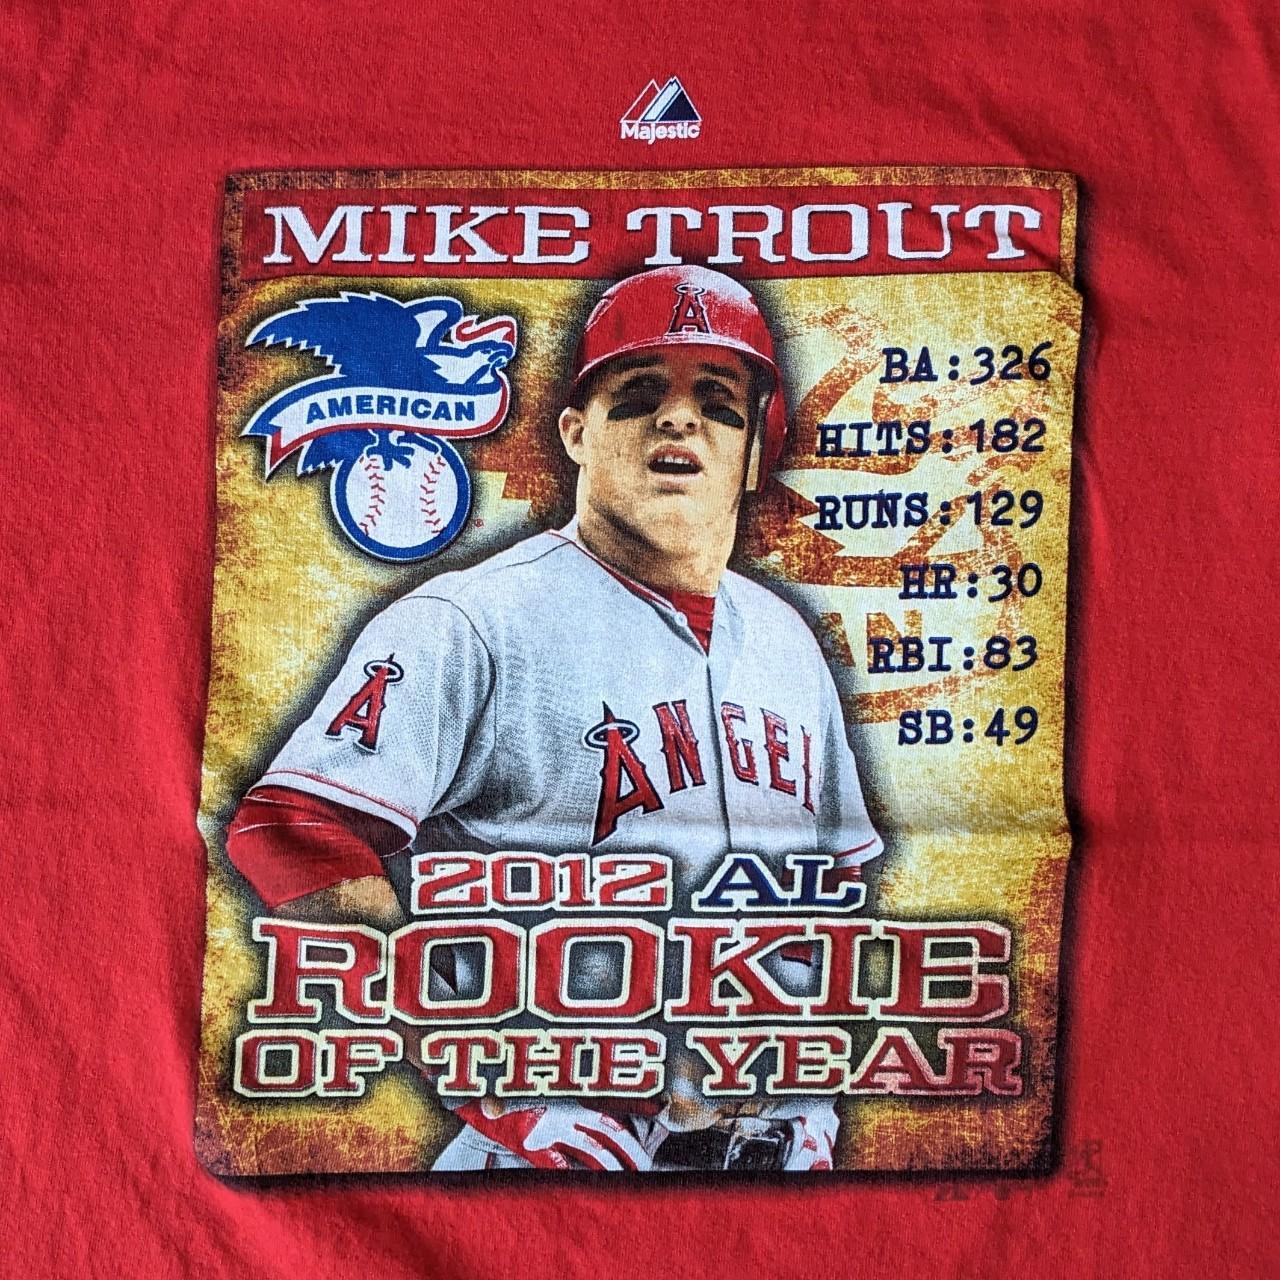 LOS ANGELES ANGELS MIKE TROUT JERSEY T-SHIRT MEDIUM MAJESTIC